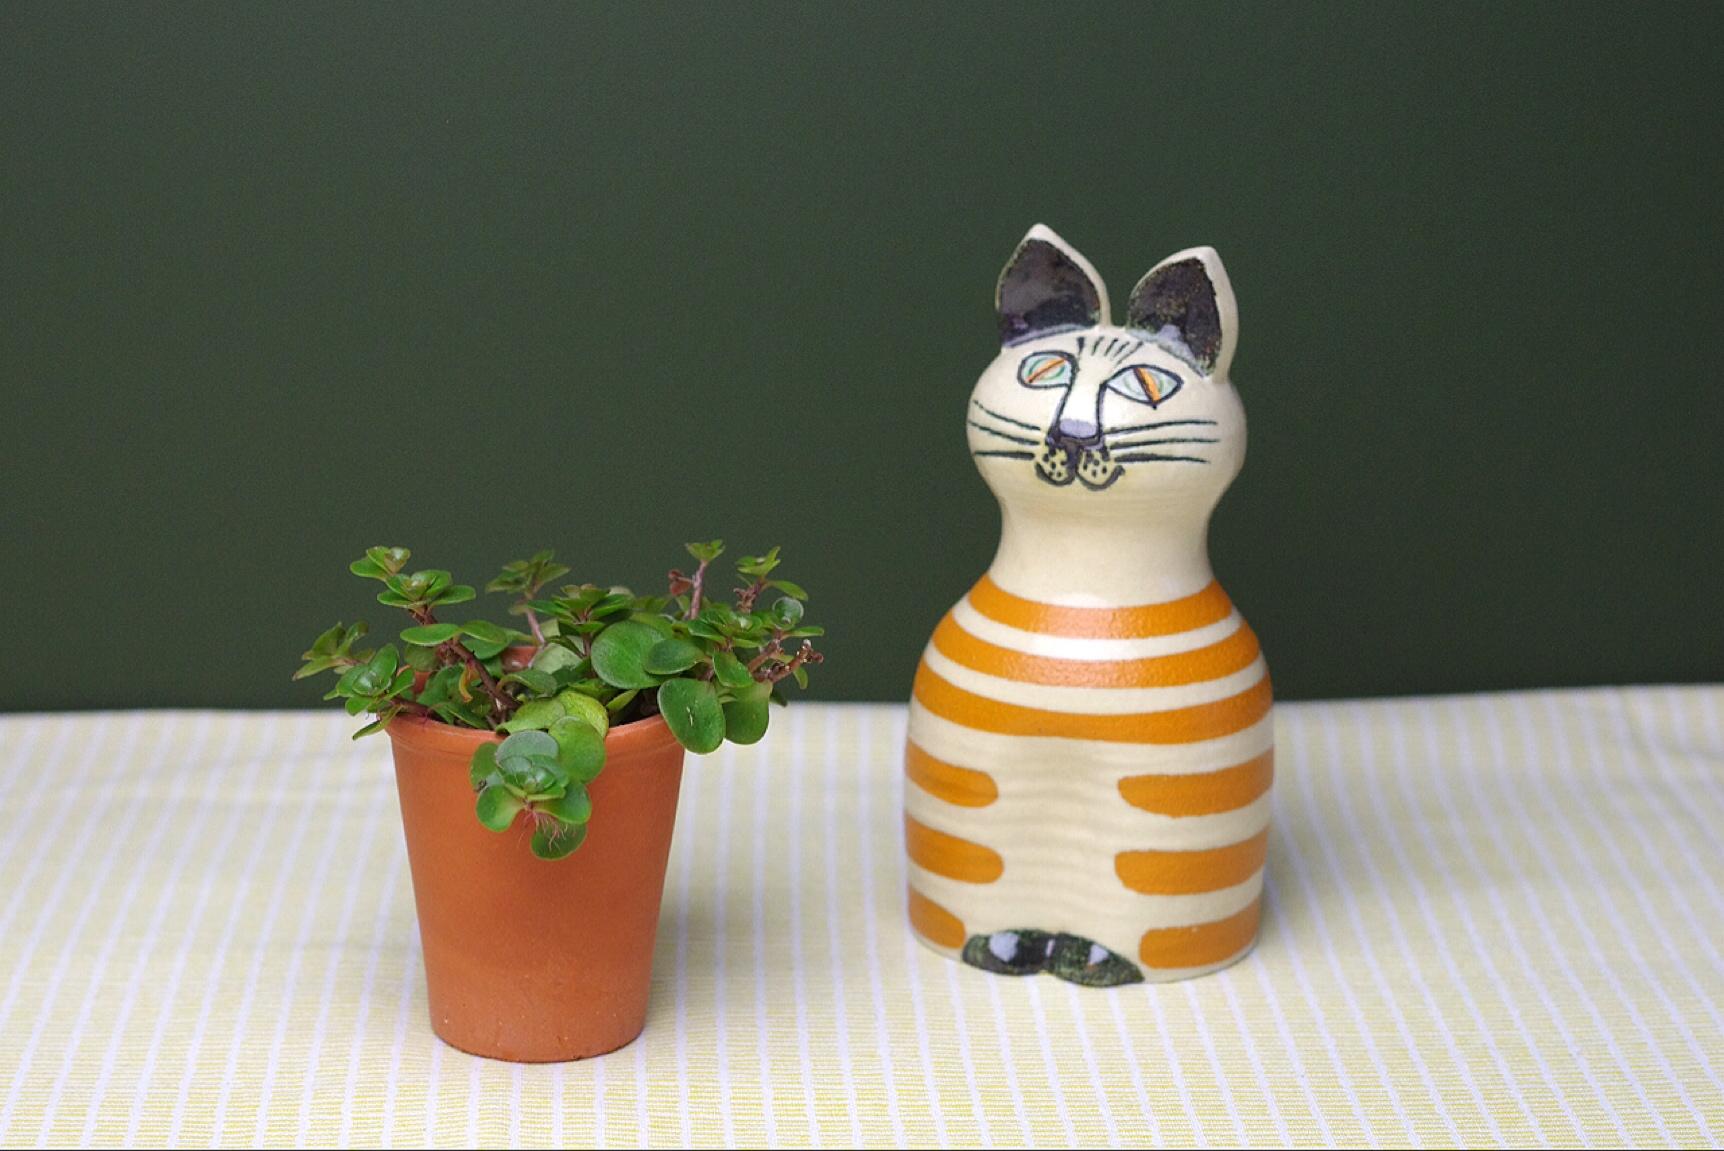 Product Description:
Another cat animal from Lisa Larson is on offer here. This time we offer and item from the The Tripp Trapp Trull - series, consisting of three figures. The series was produced only for two years. This item 